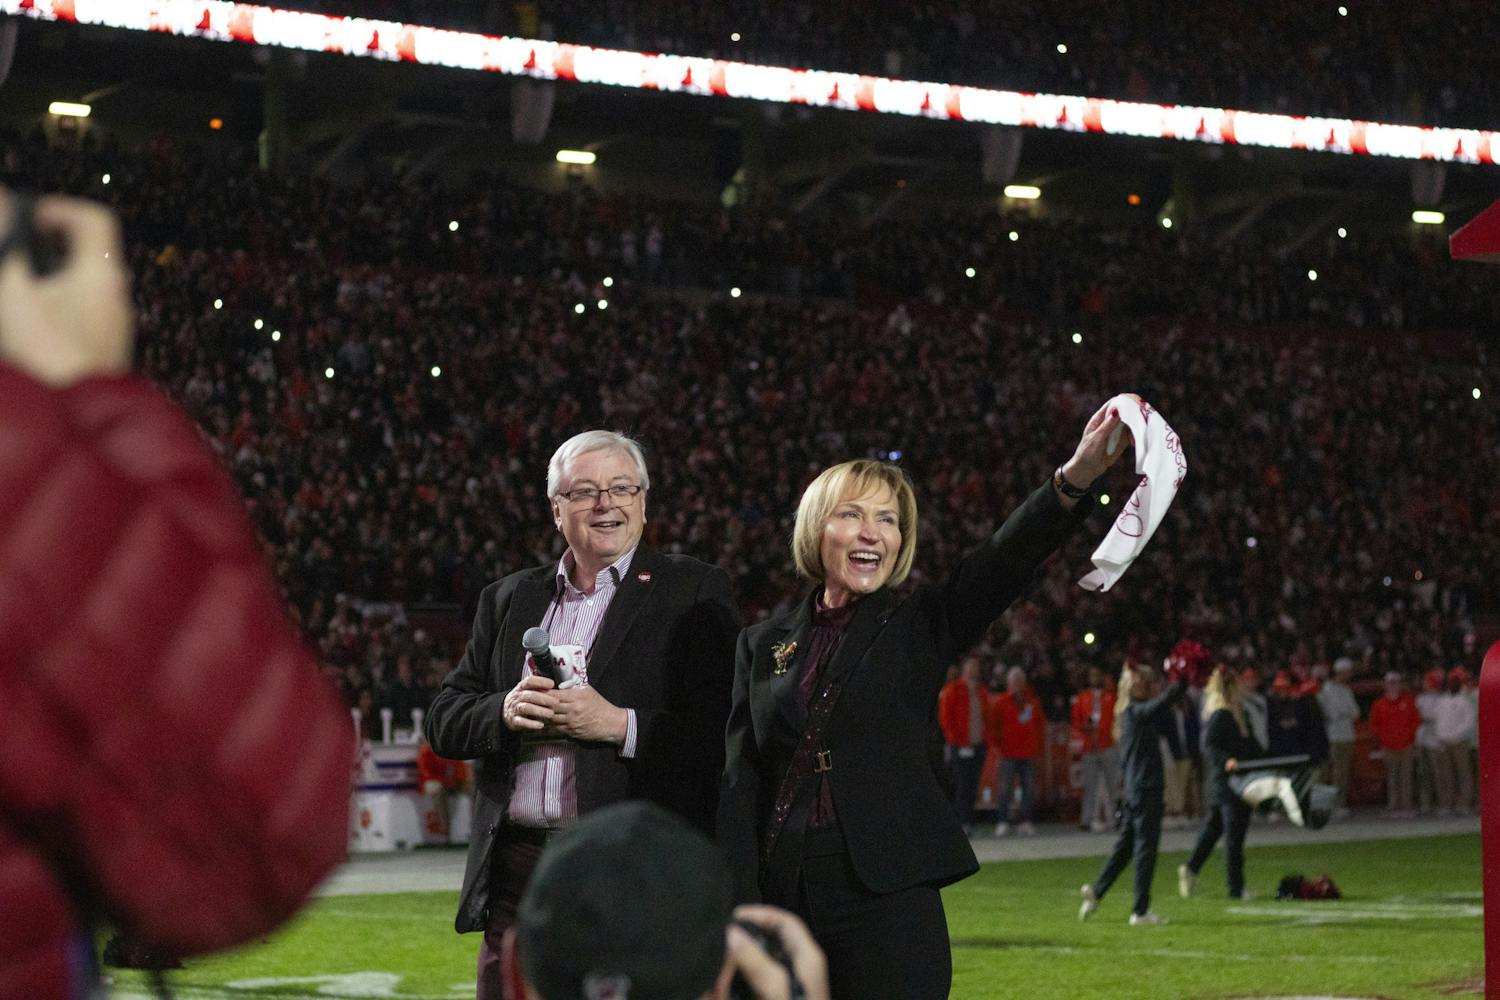 University of South Carolina President Michael Amiridis and his wife, Ero Aggelopoulou-Amiridis, lead Williams-Brice Stadium in the “Game-Cock” chant prior to kickoff on Nov. 25, 2023. Amiridis became the 30th president of the university on July 1, 2022.